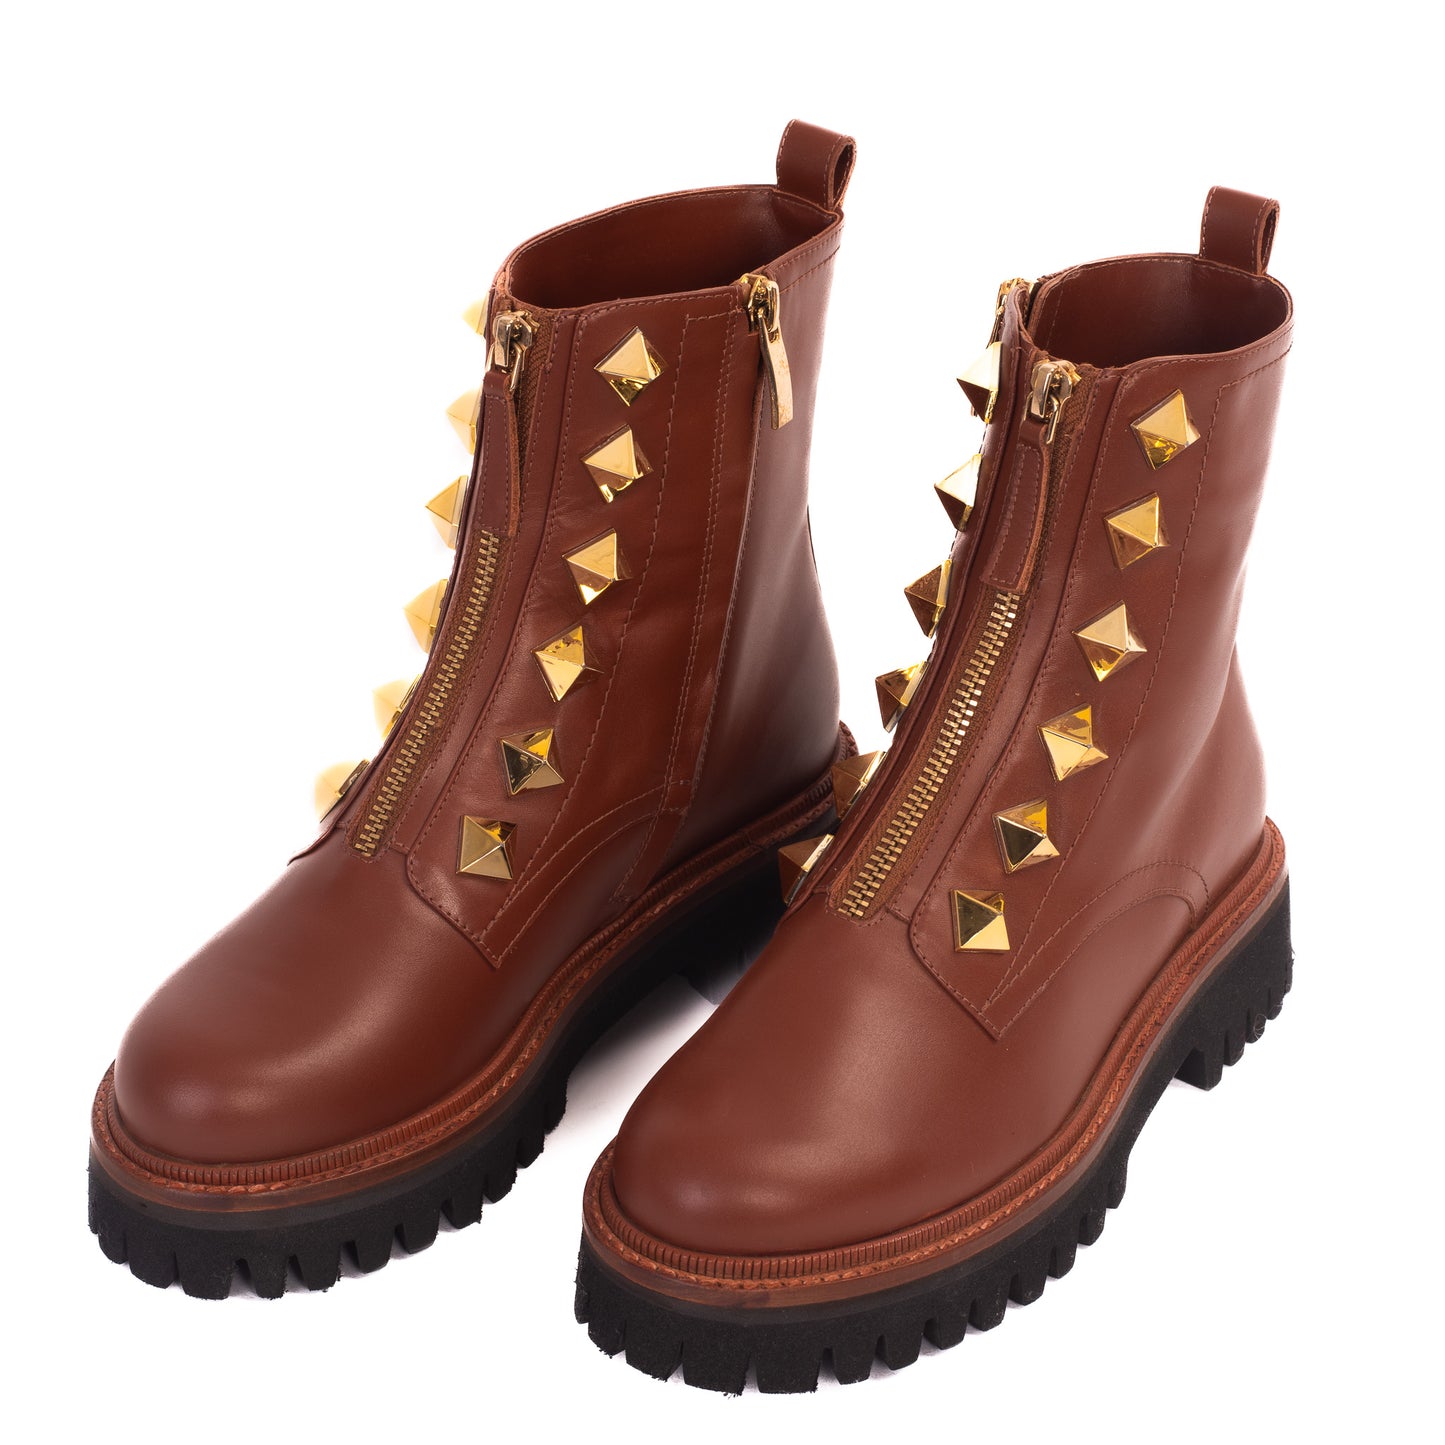 The Ottawa Brown Leather Ankle Women Boot